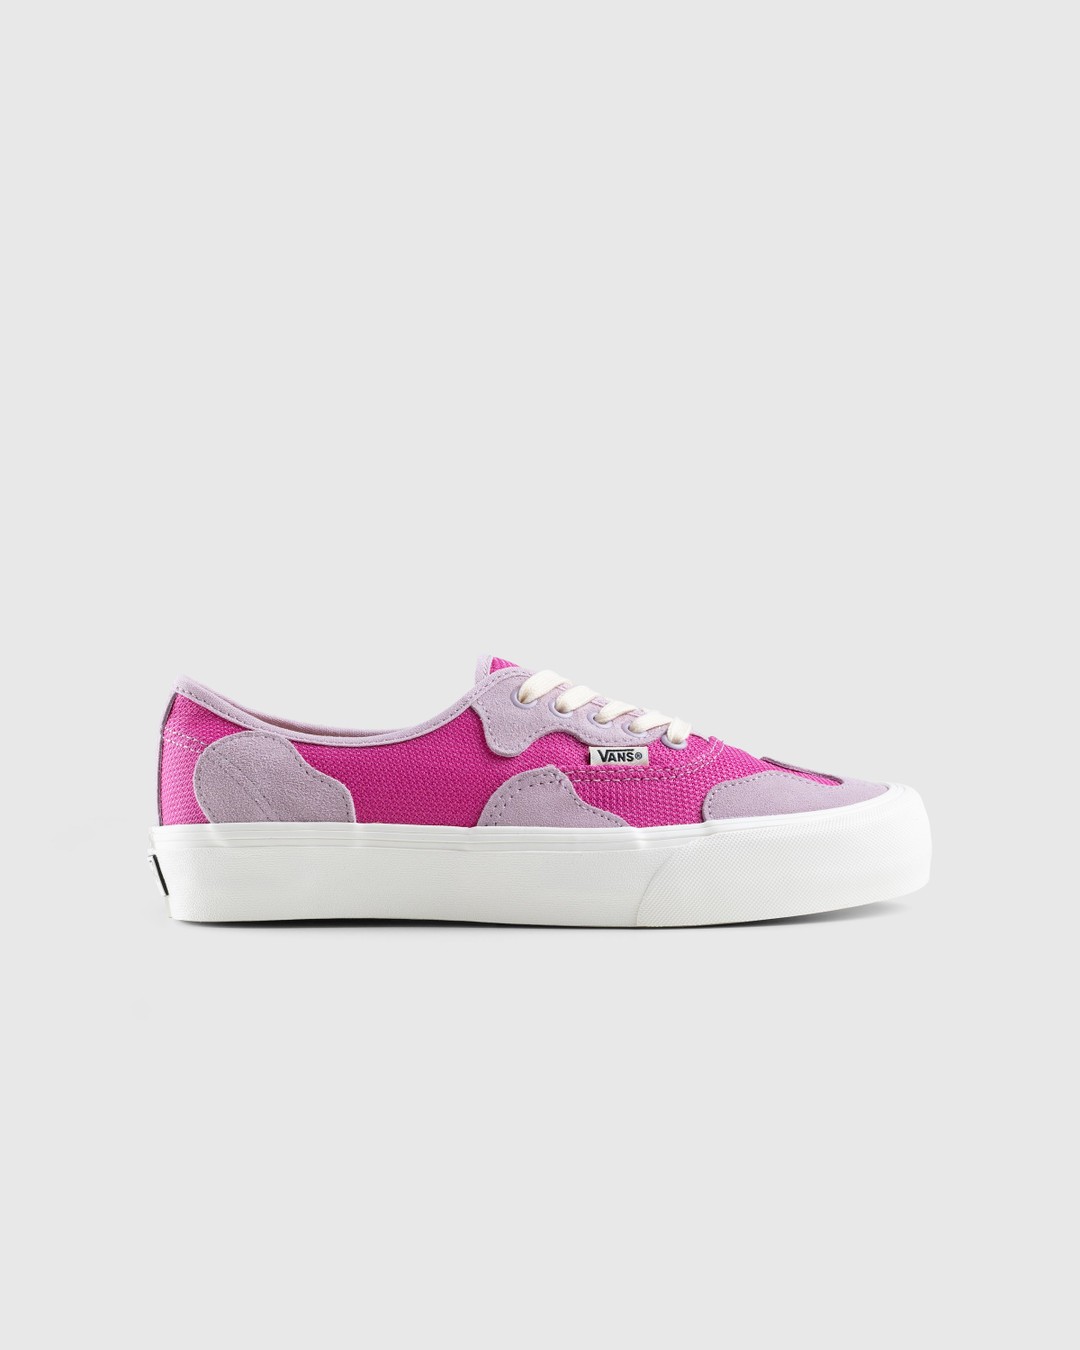 Vans – UA Authentic VR3 PW LX Pink - Sneakers - Pink - Image 1